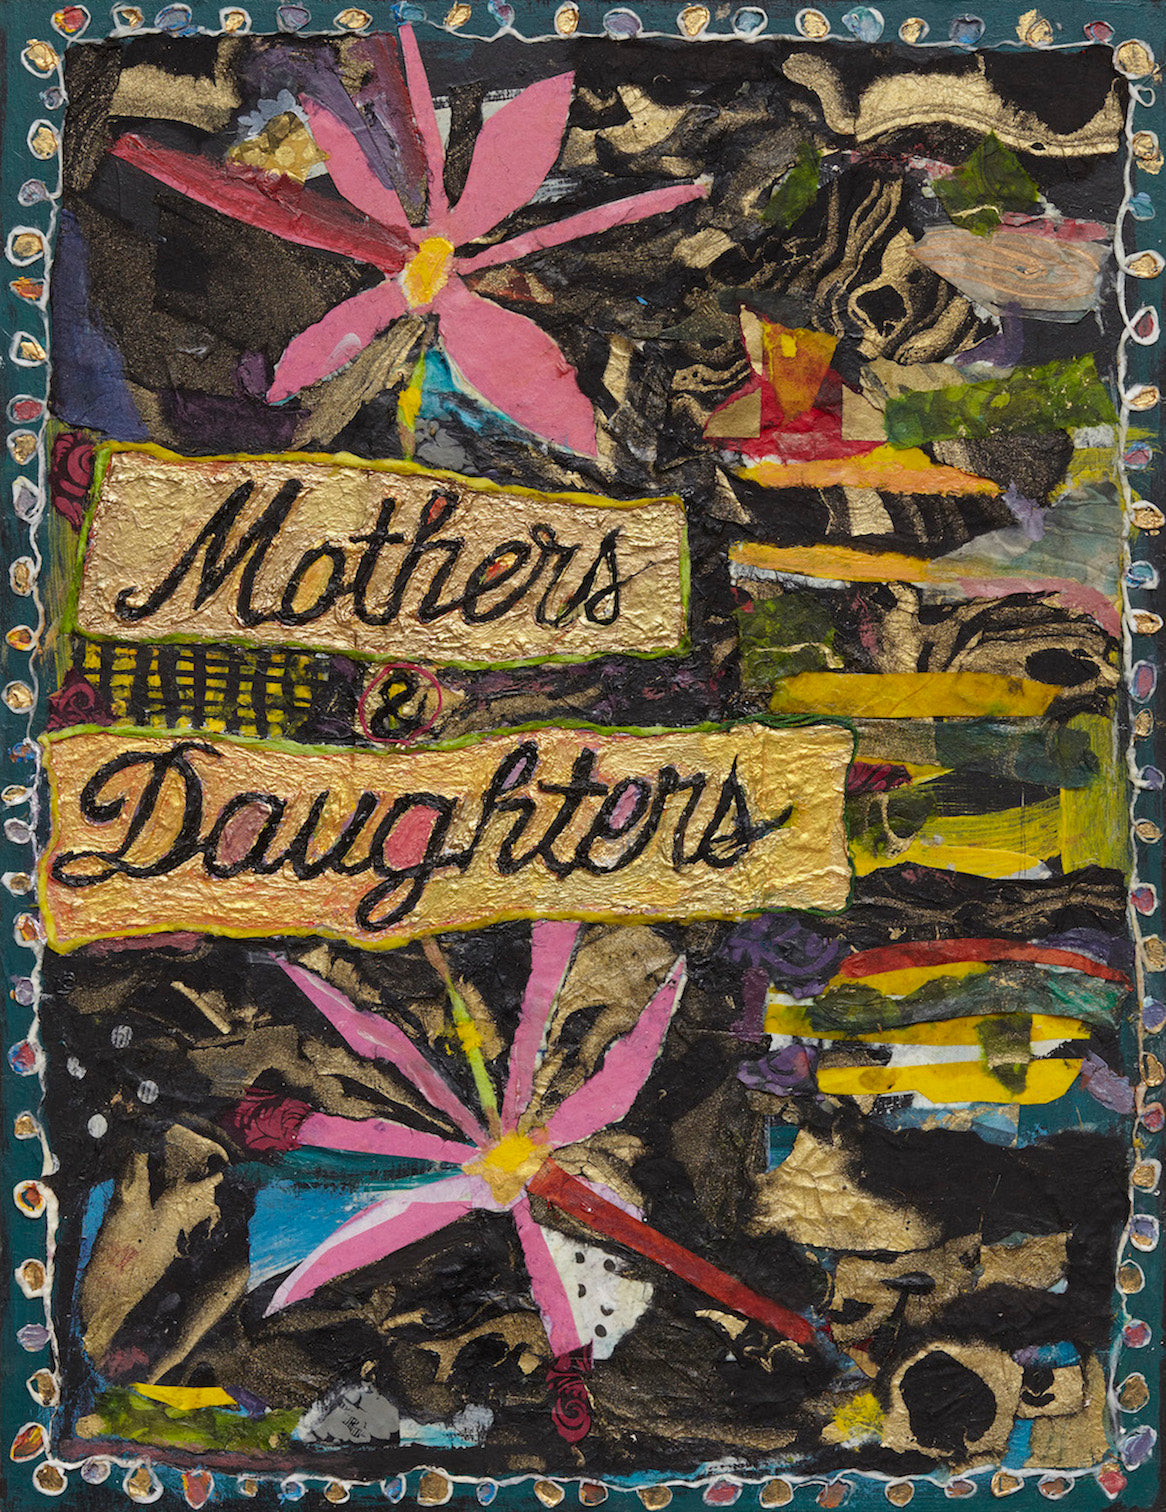 Robin Kahn, "Mothers Daughters"